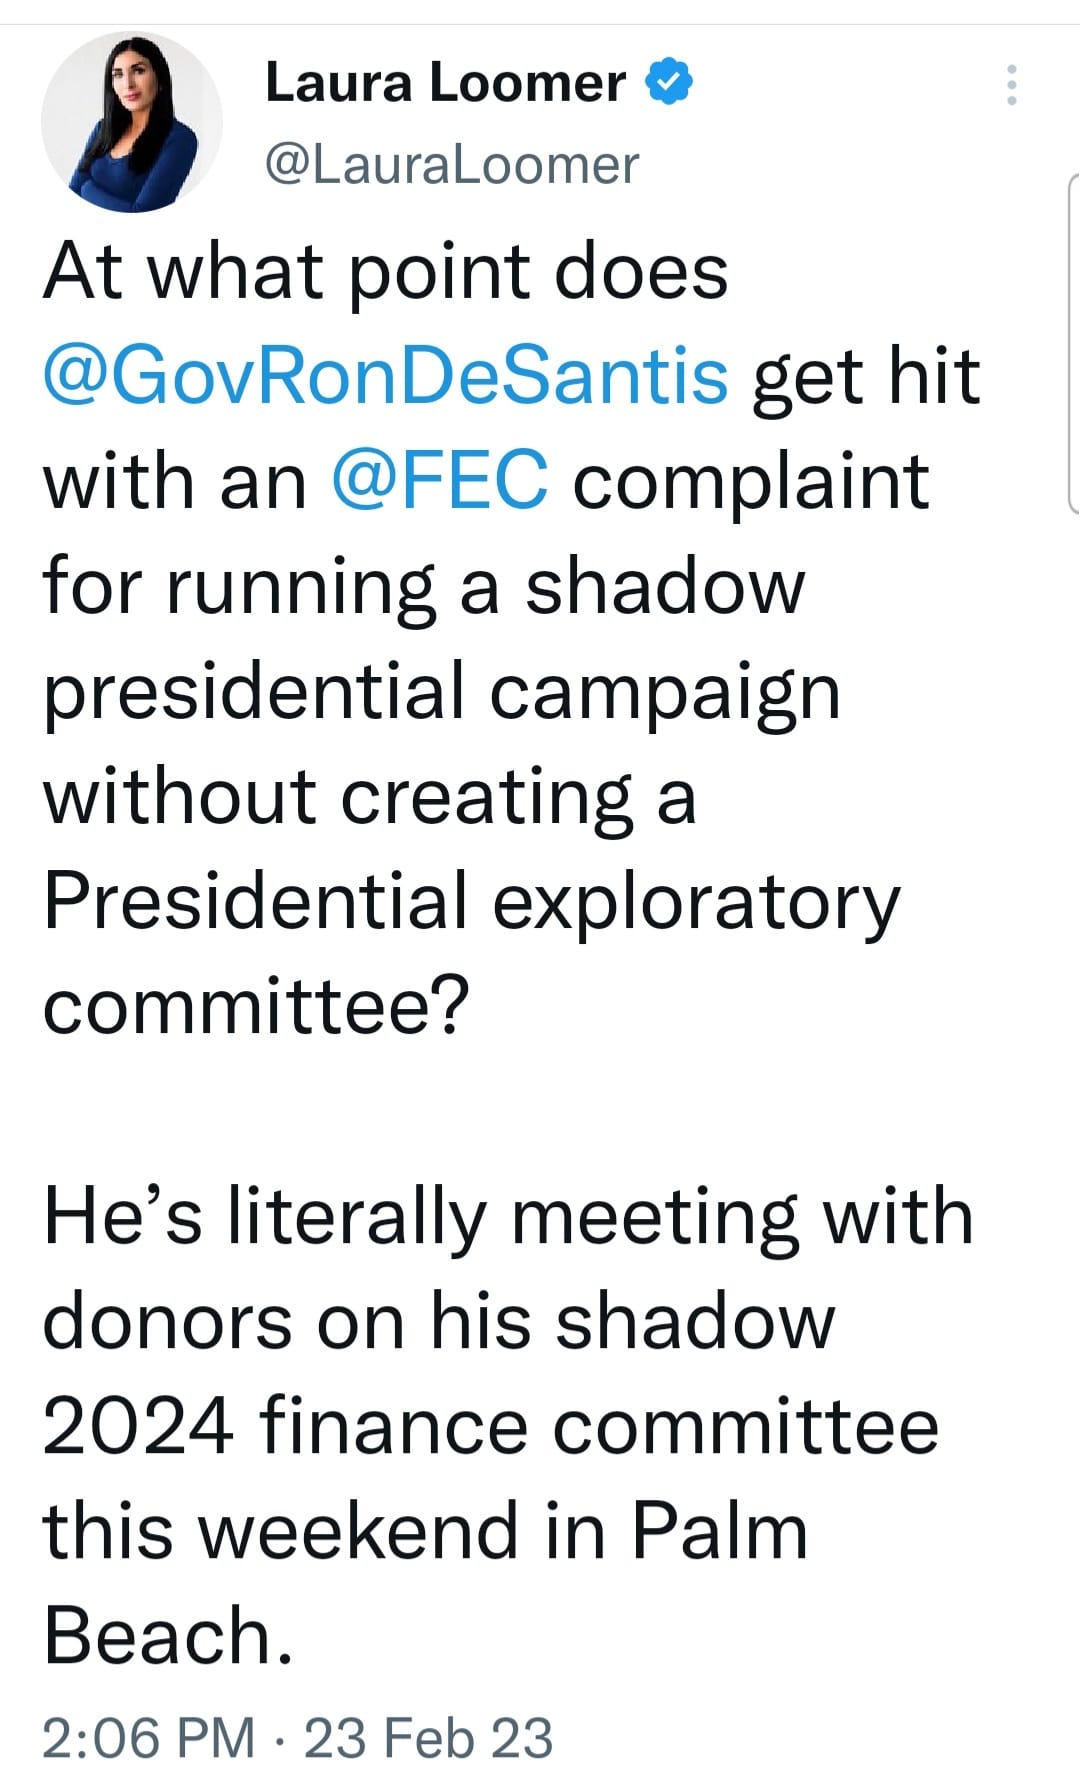 May be an image of 1 person and text that says 'Laura Loomer @LauraLoomer At what point does @GovRonDeSantis get hit with an @FEC complaint for running a shadow presidential campaign without creating a Presidential exploratory committee? He's literally meeting with donors on his shadow 2024 finance committee this weekend in Palm Beach. 2:06 PM 23 Feb 23'